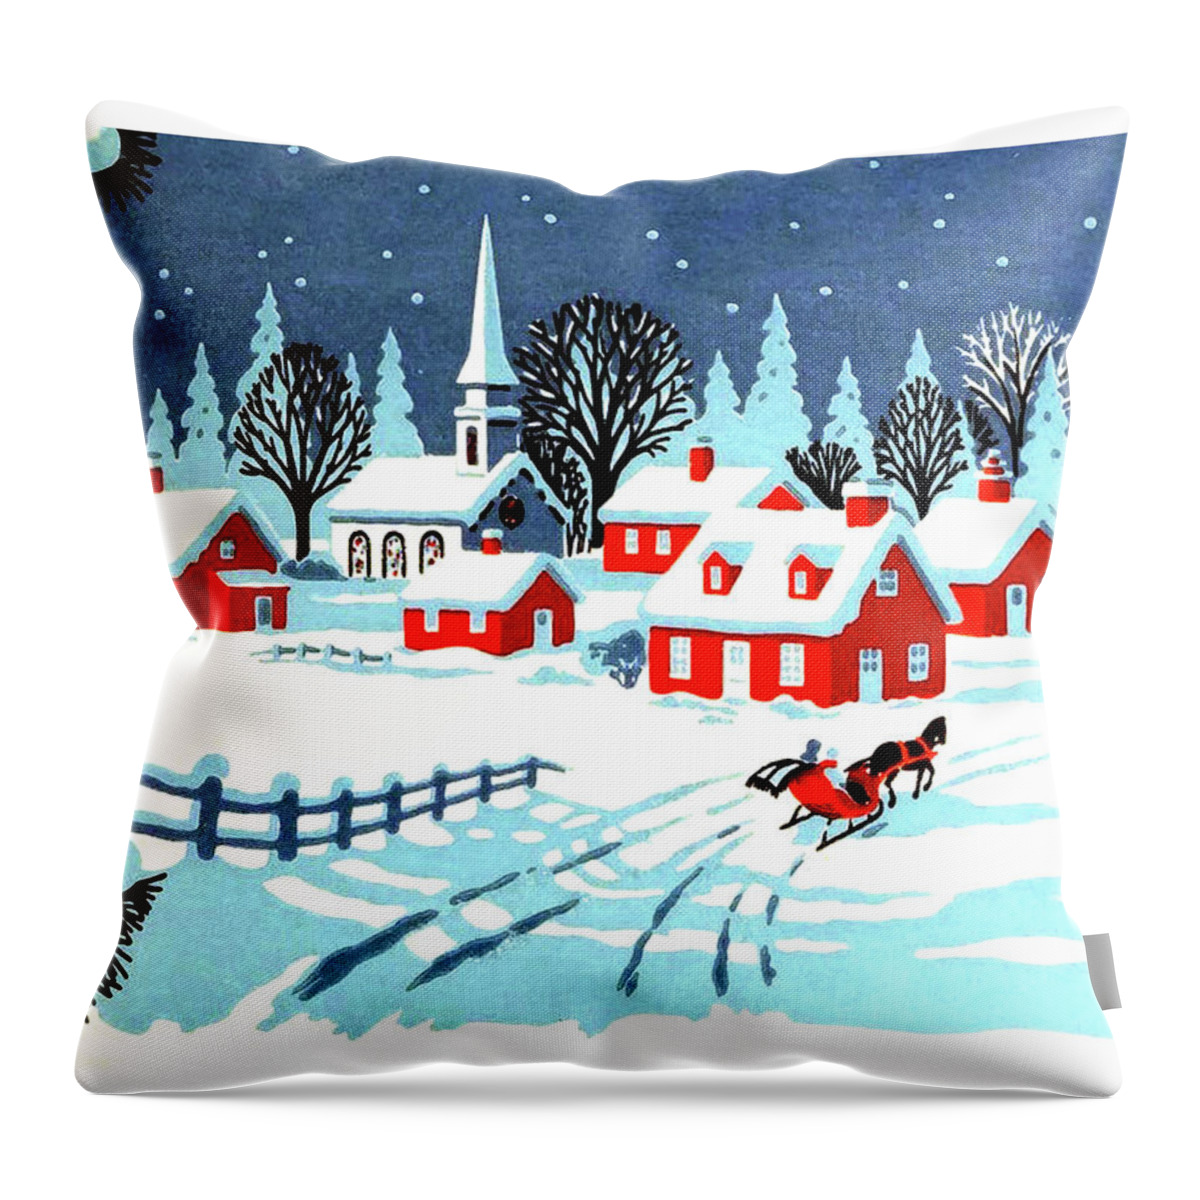 Snow Throw Pillow featuring the digital art Riding carriage through the snow by Long Shot